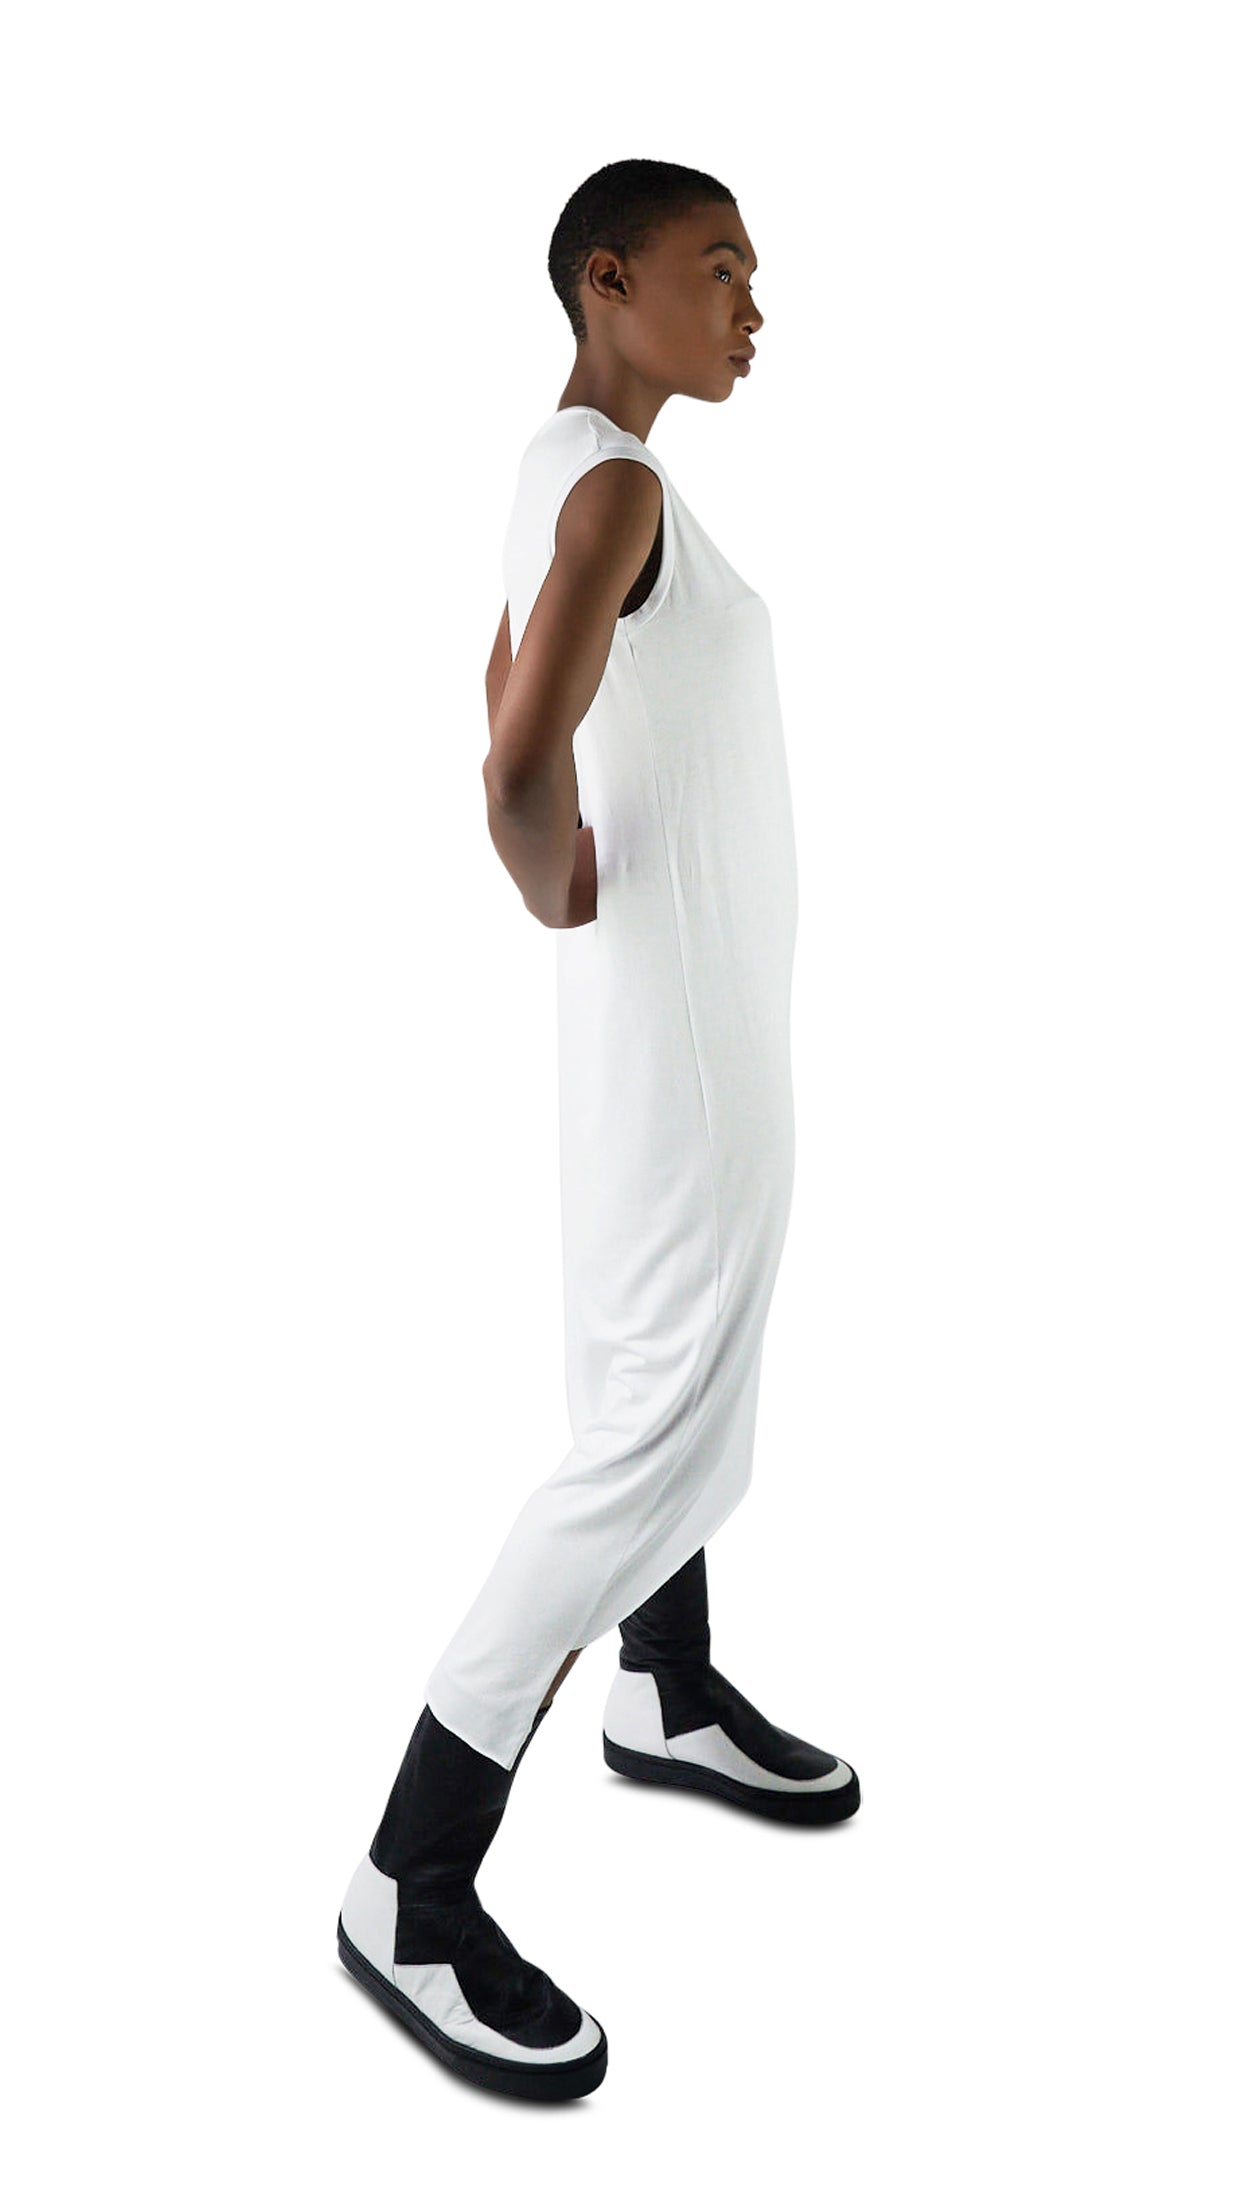 LOCO ONE ACHROMATIC COLLECTION.  DESIGN NUMERO 09.  Unisex long dress made with natural materials only. Main composition is BAMBOO with asymmetrical cuts, futuristic, minimalistic look, perfect finishes on both sleeves and neckline, raw hem. Loose fit.